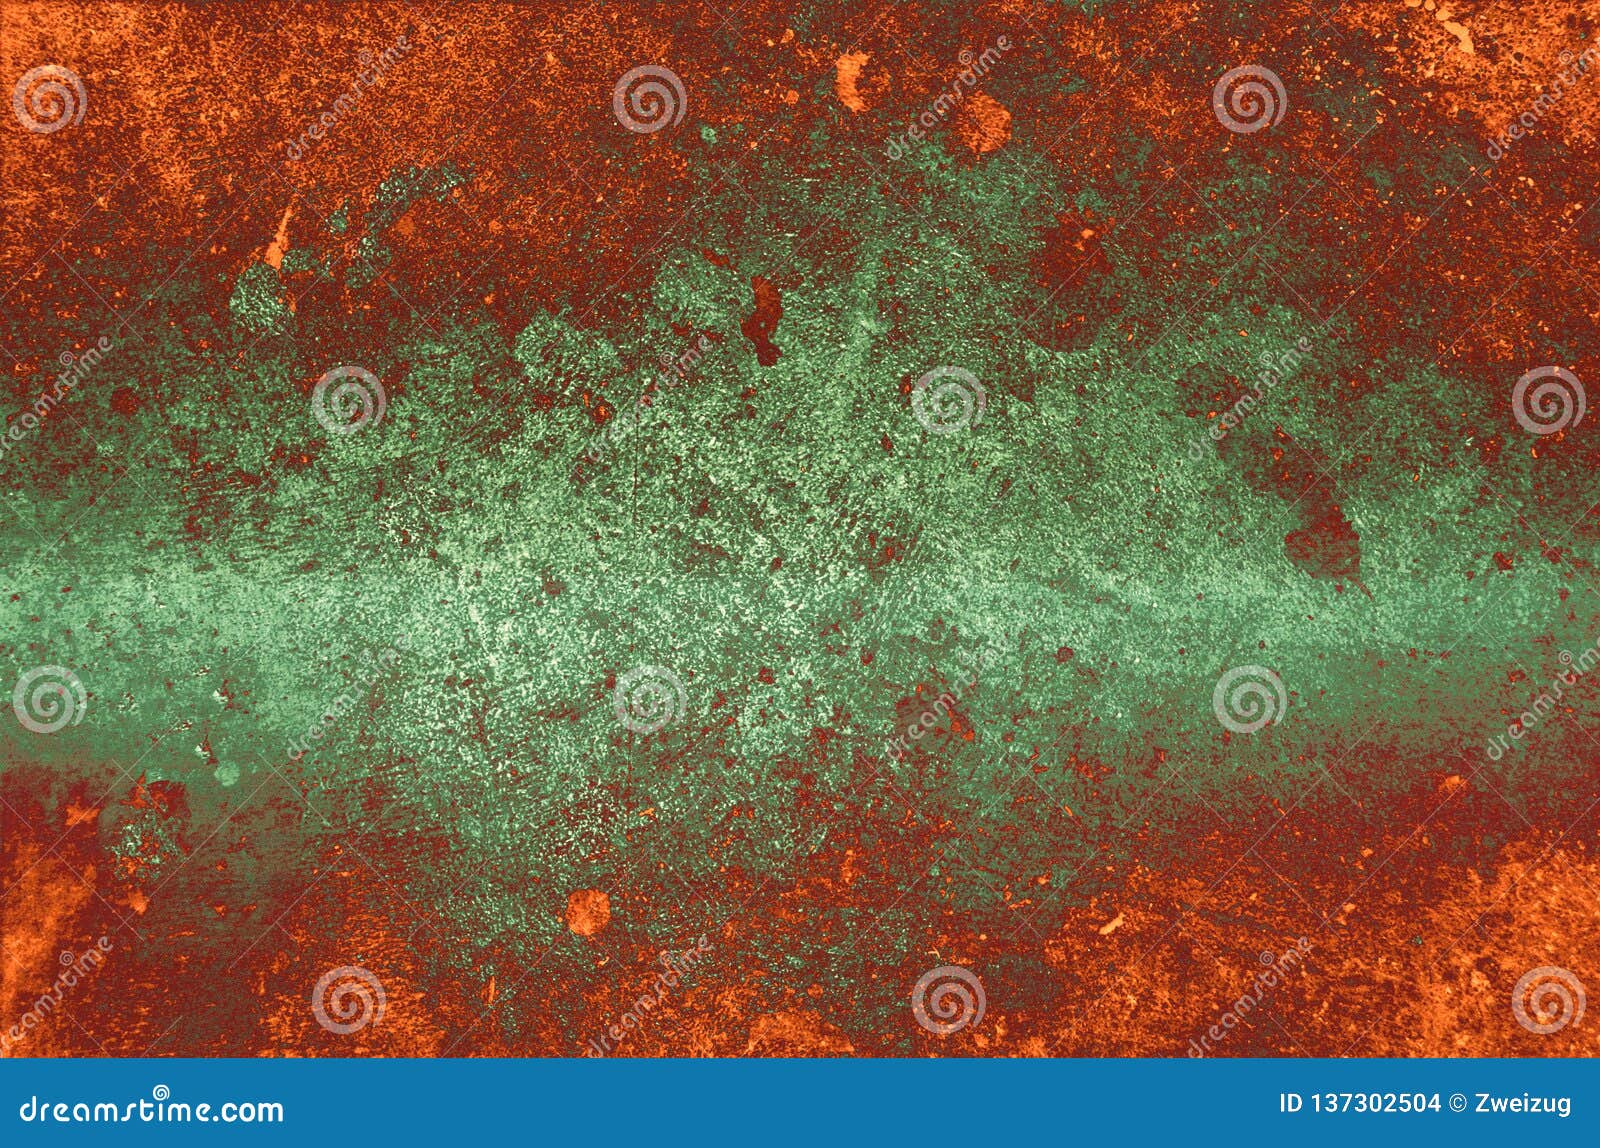 oxidized copper conceptual pattern surface abstract texture background